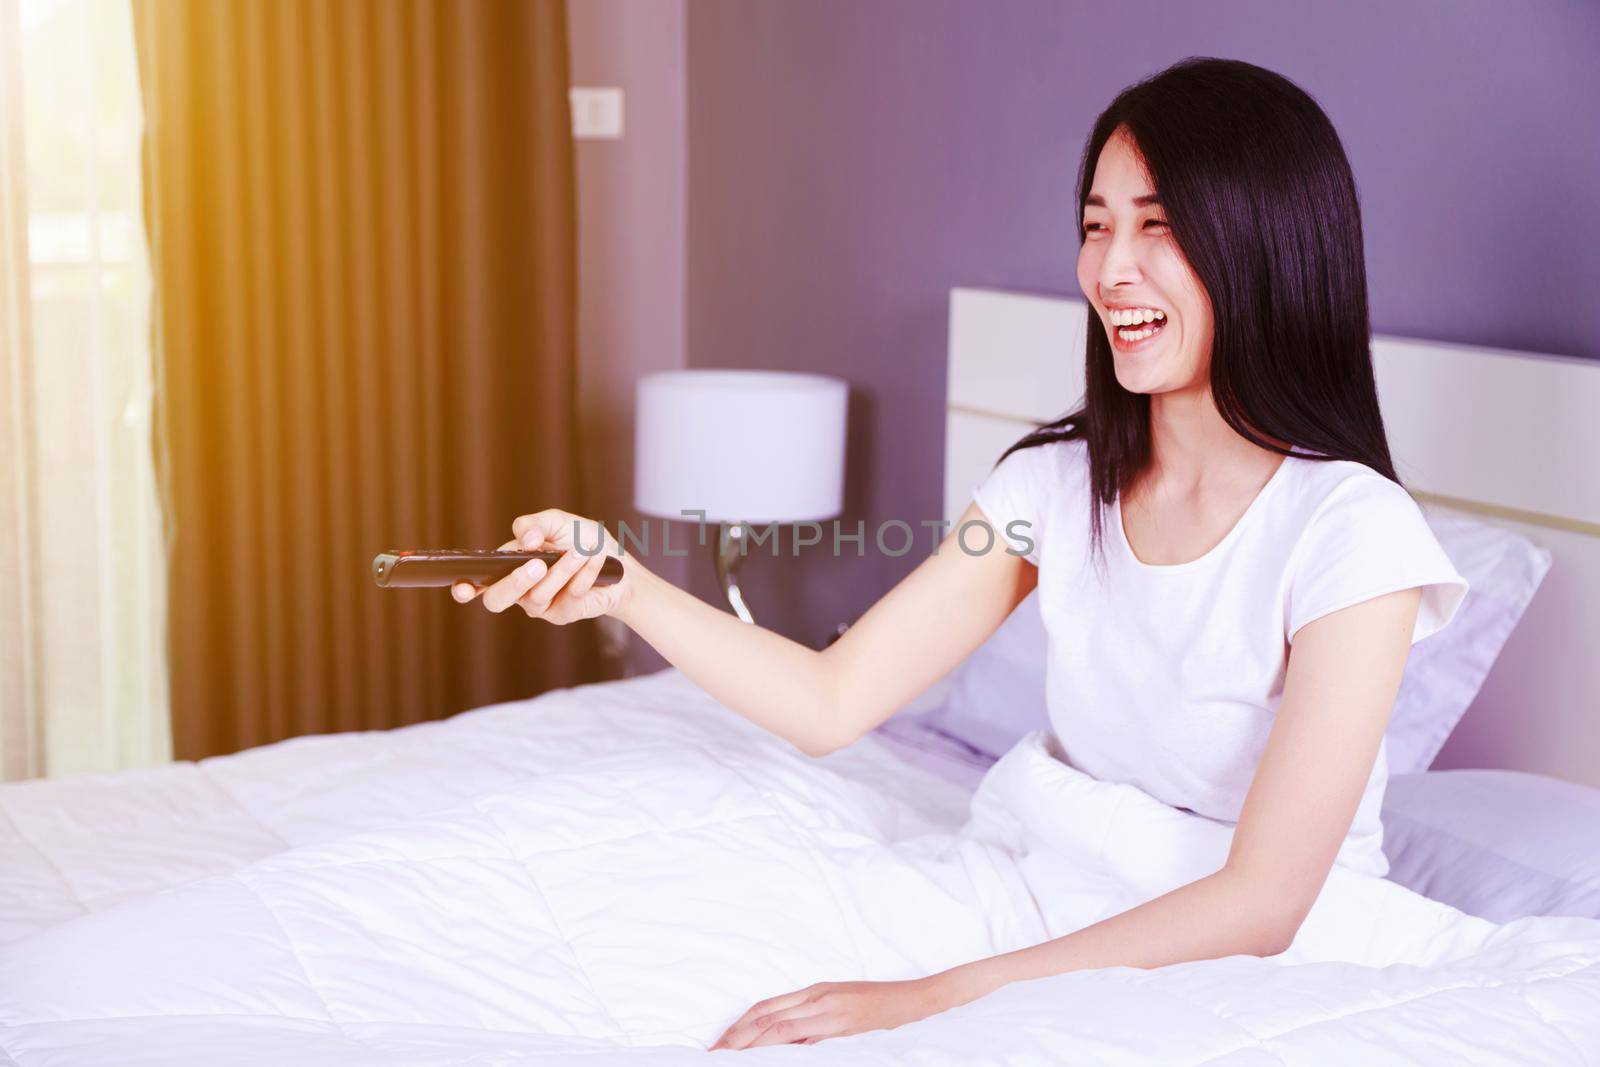 woman watching TV laughing having fun with remote control on the bed